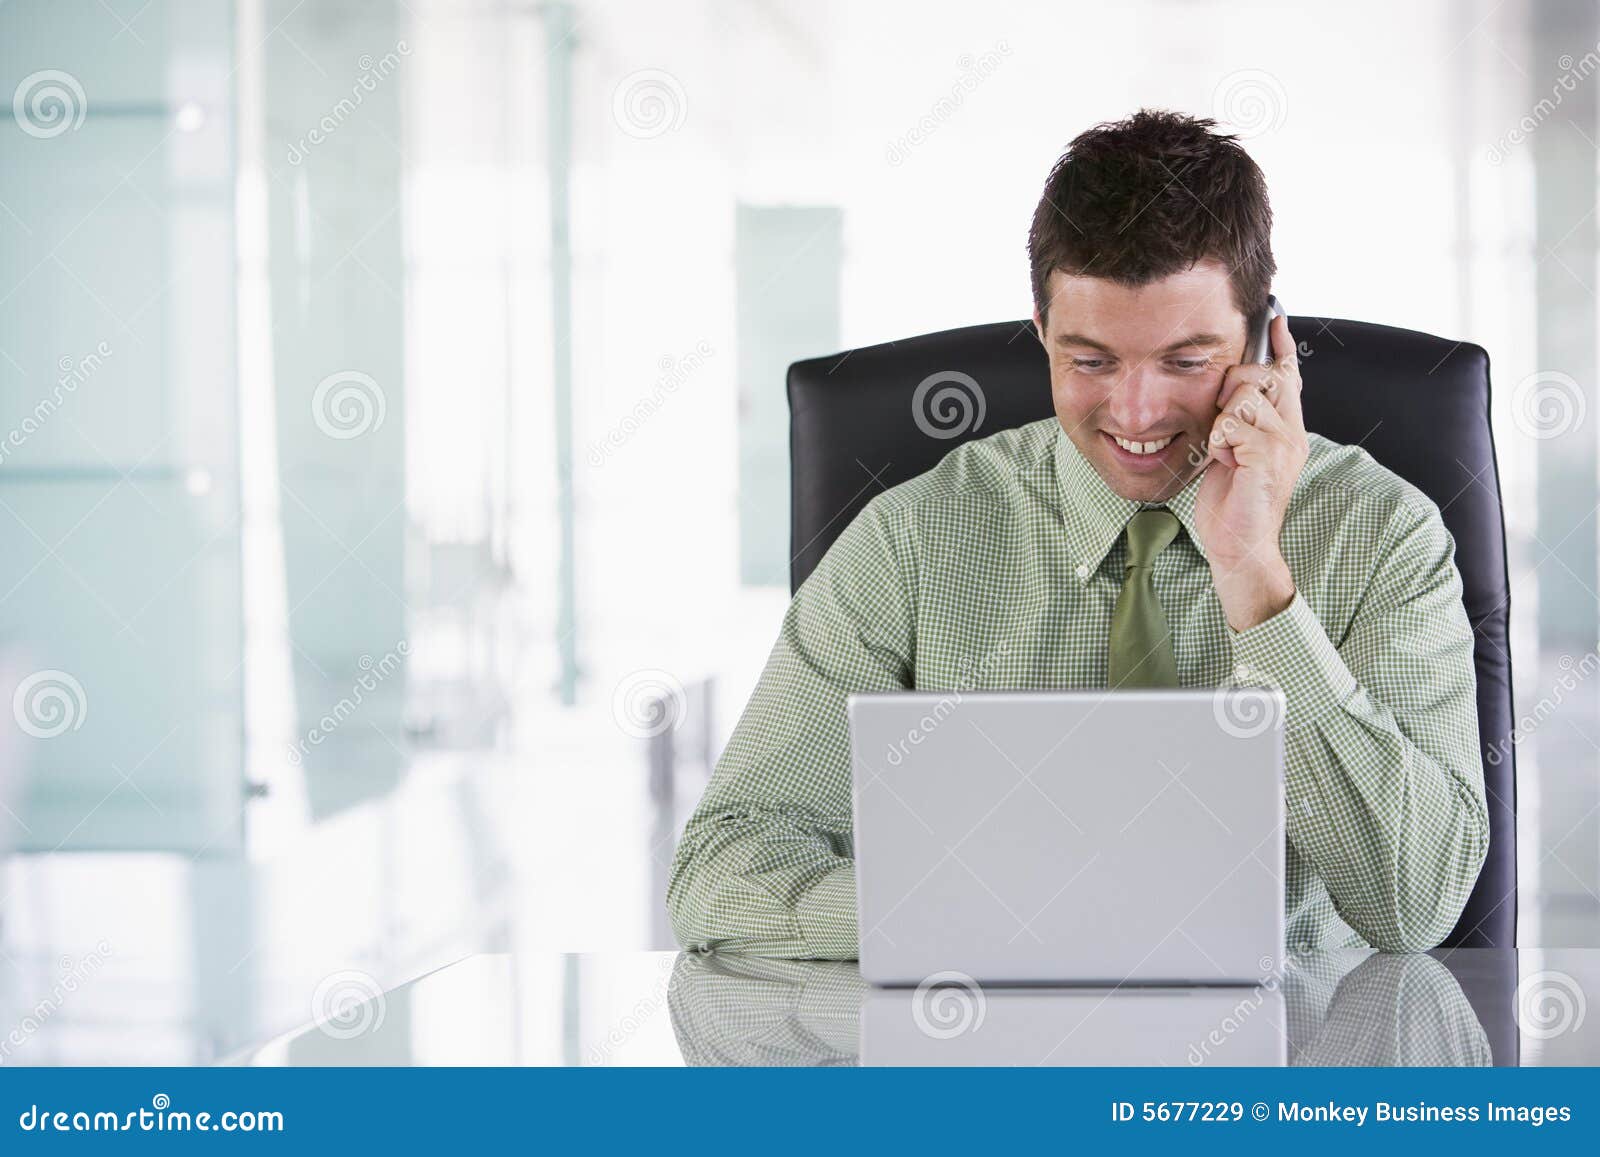 businessman sitting in office using cellular phone